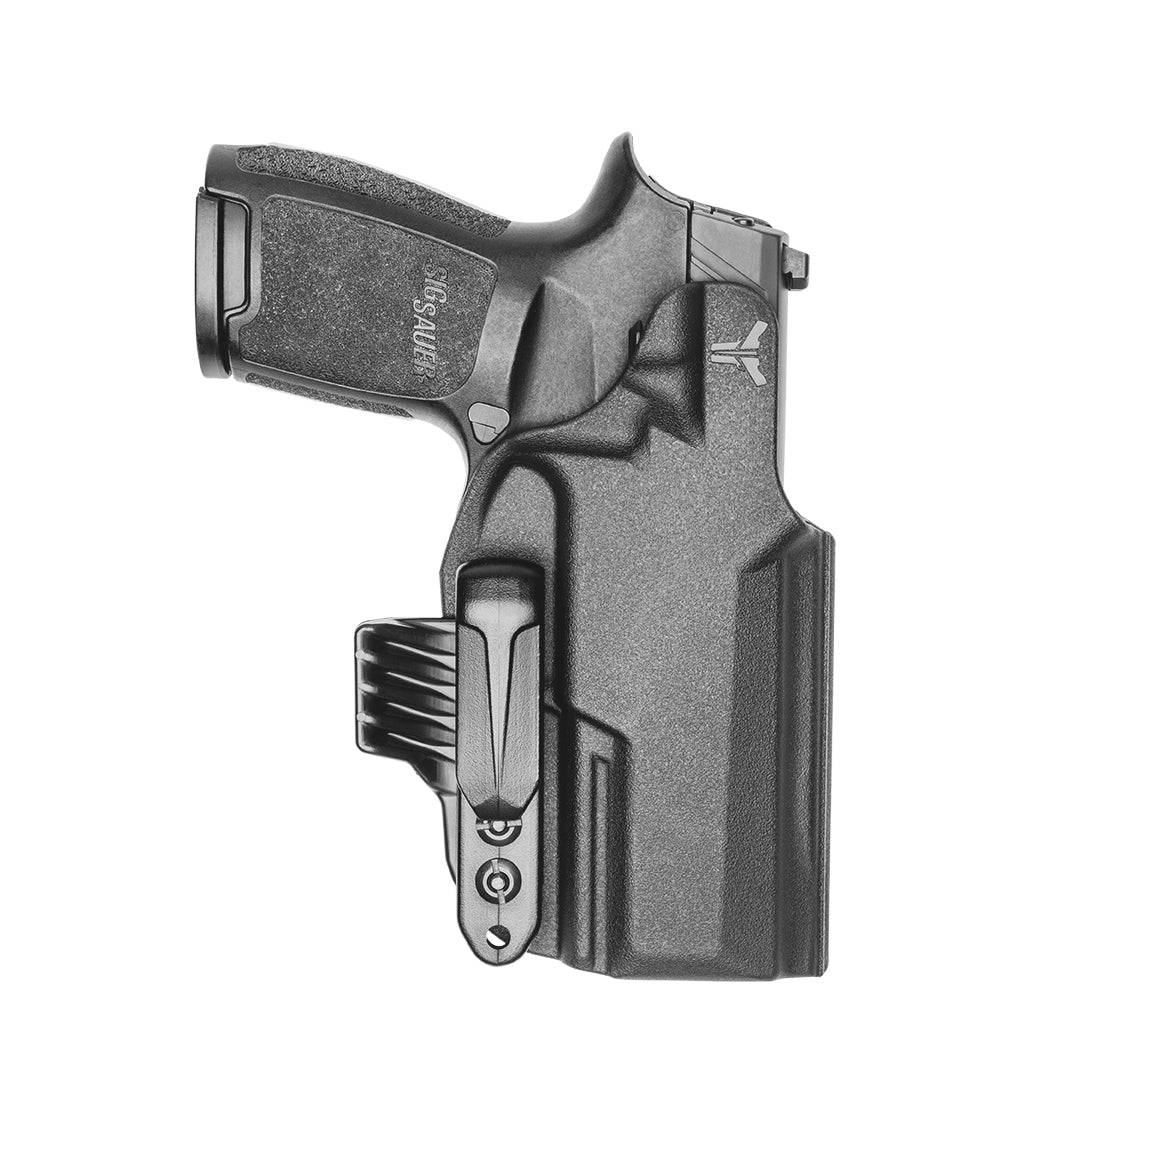 Ultimate Klipt Appendix Carry Holster, Products